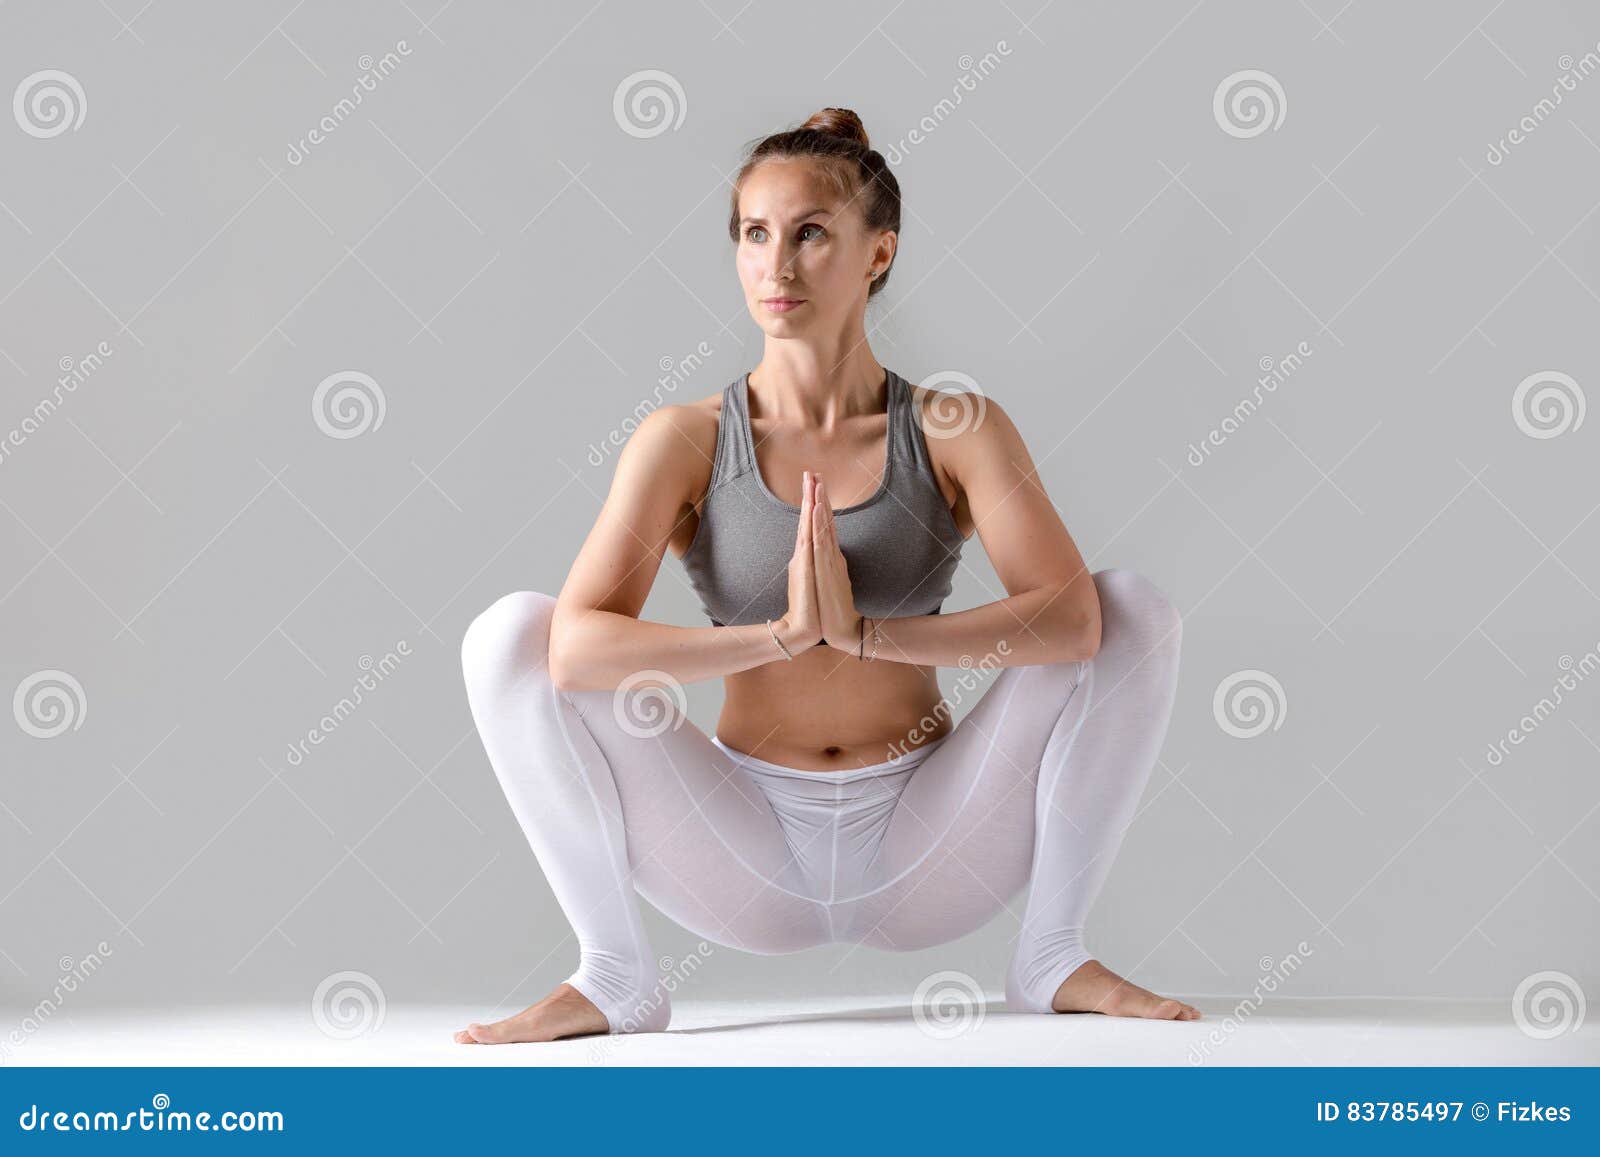 young woman malasana pose grey studio background attractive practicing yoga sitting garland exercise working out wearing 83785497